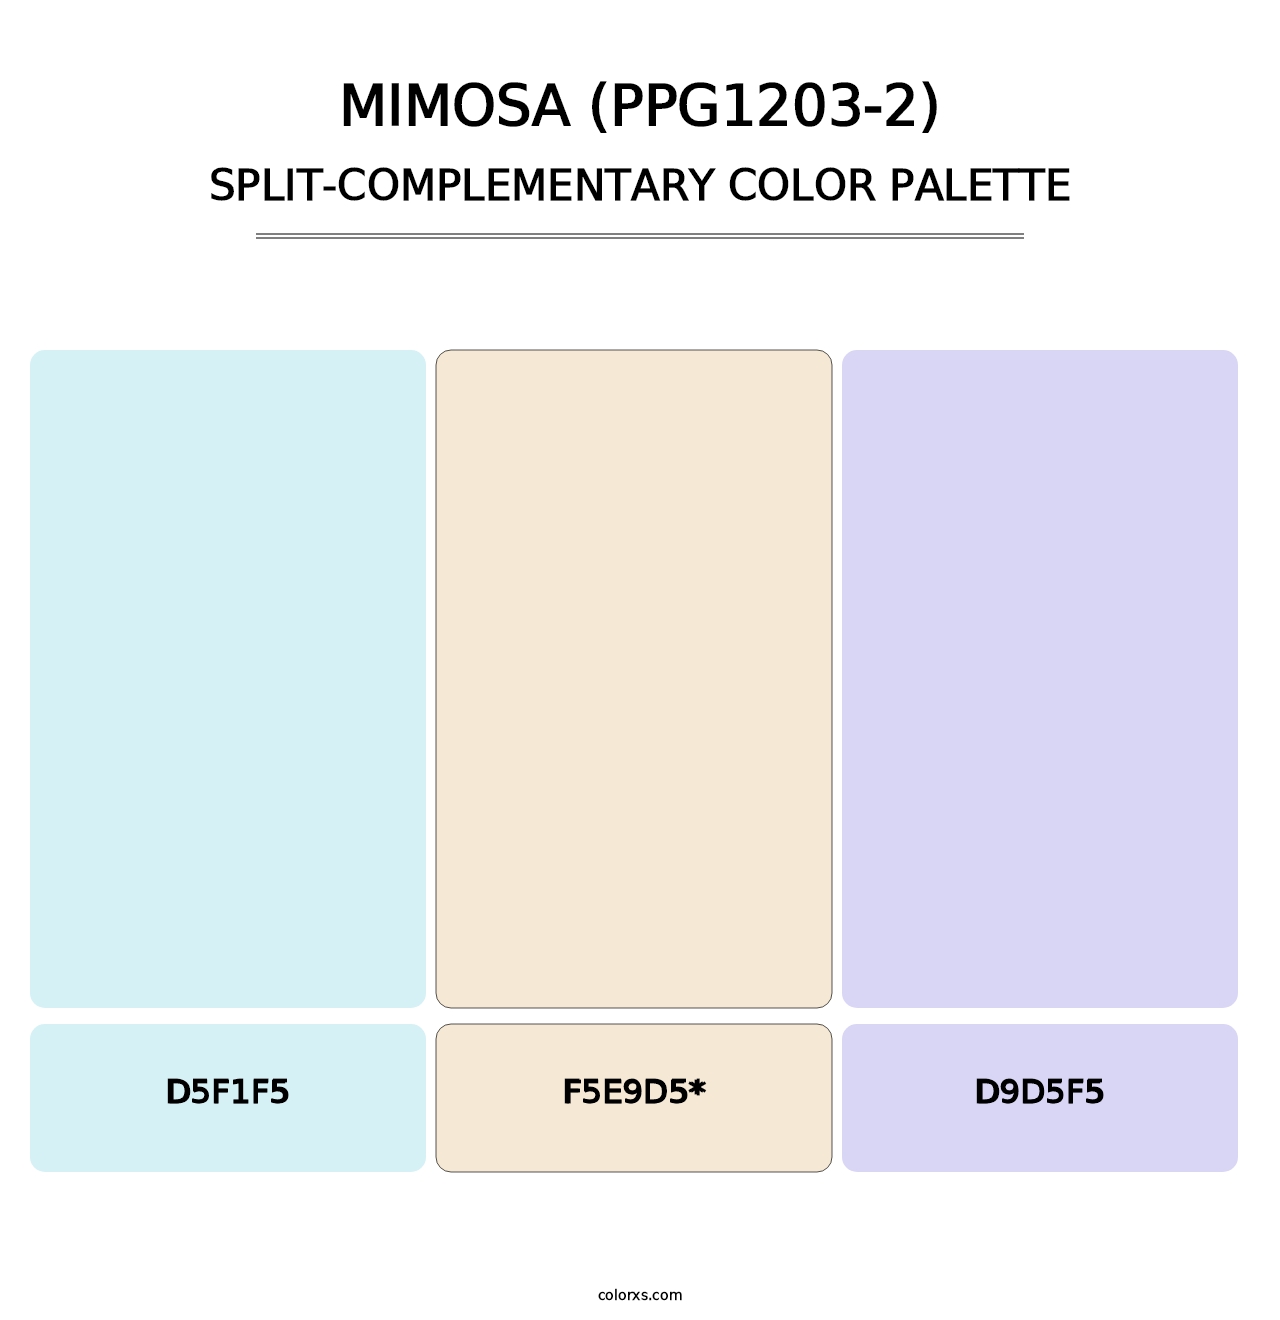 Mimosa (PPG1203-2) - Split-Complementary Color Palette